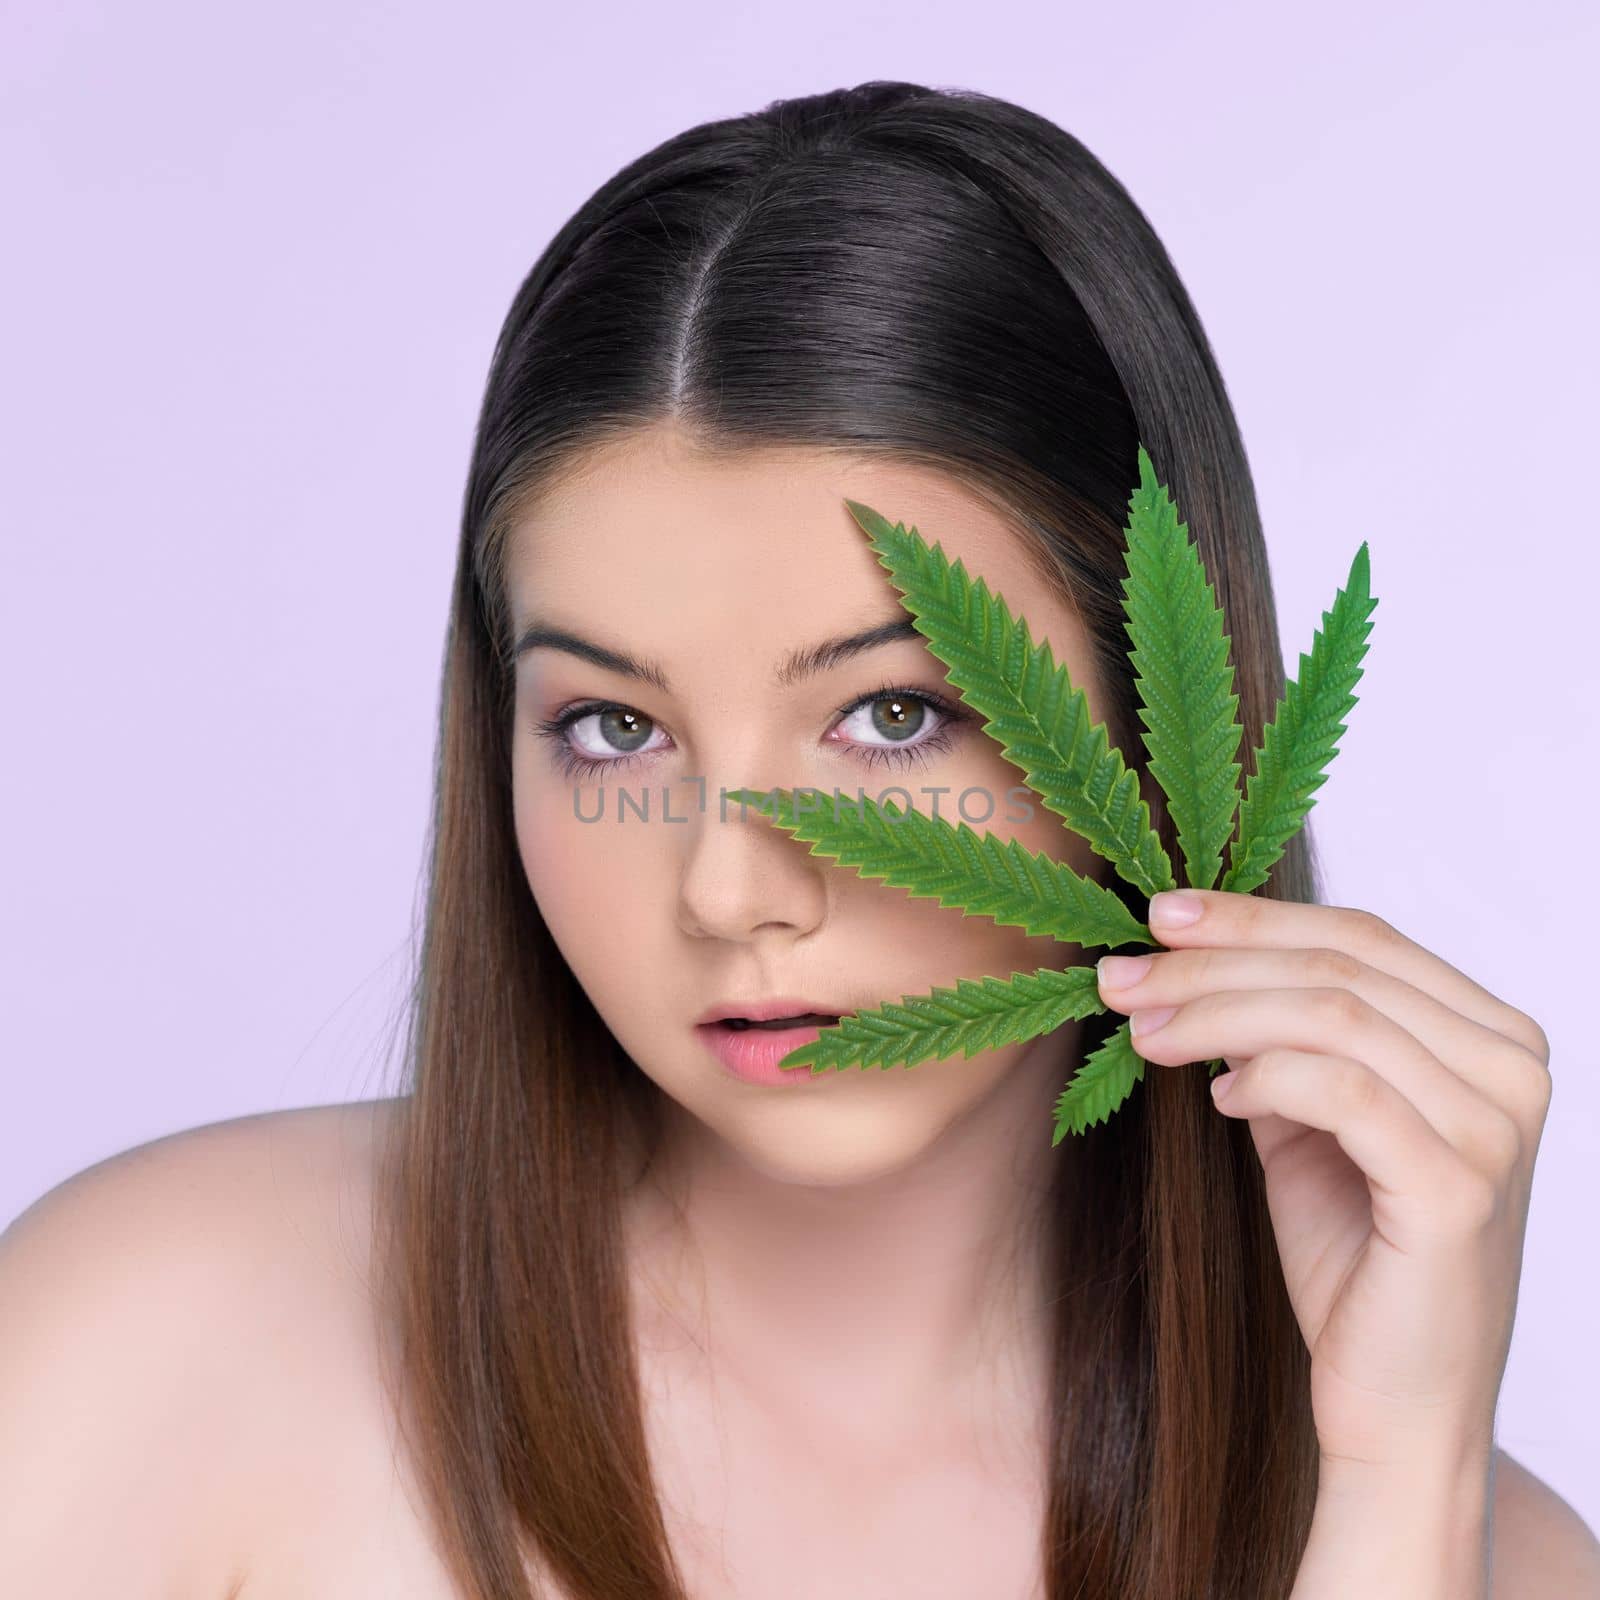 Closeup portrait of charming girl with fresh skin holding green leaf for beauty skin care made from cannabis leaf. Cosmetology and cannabis concept with isolated background.